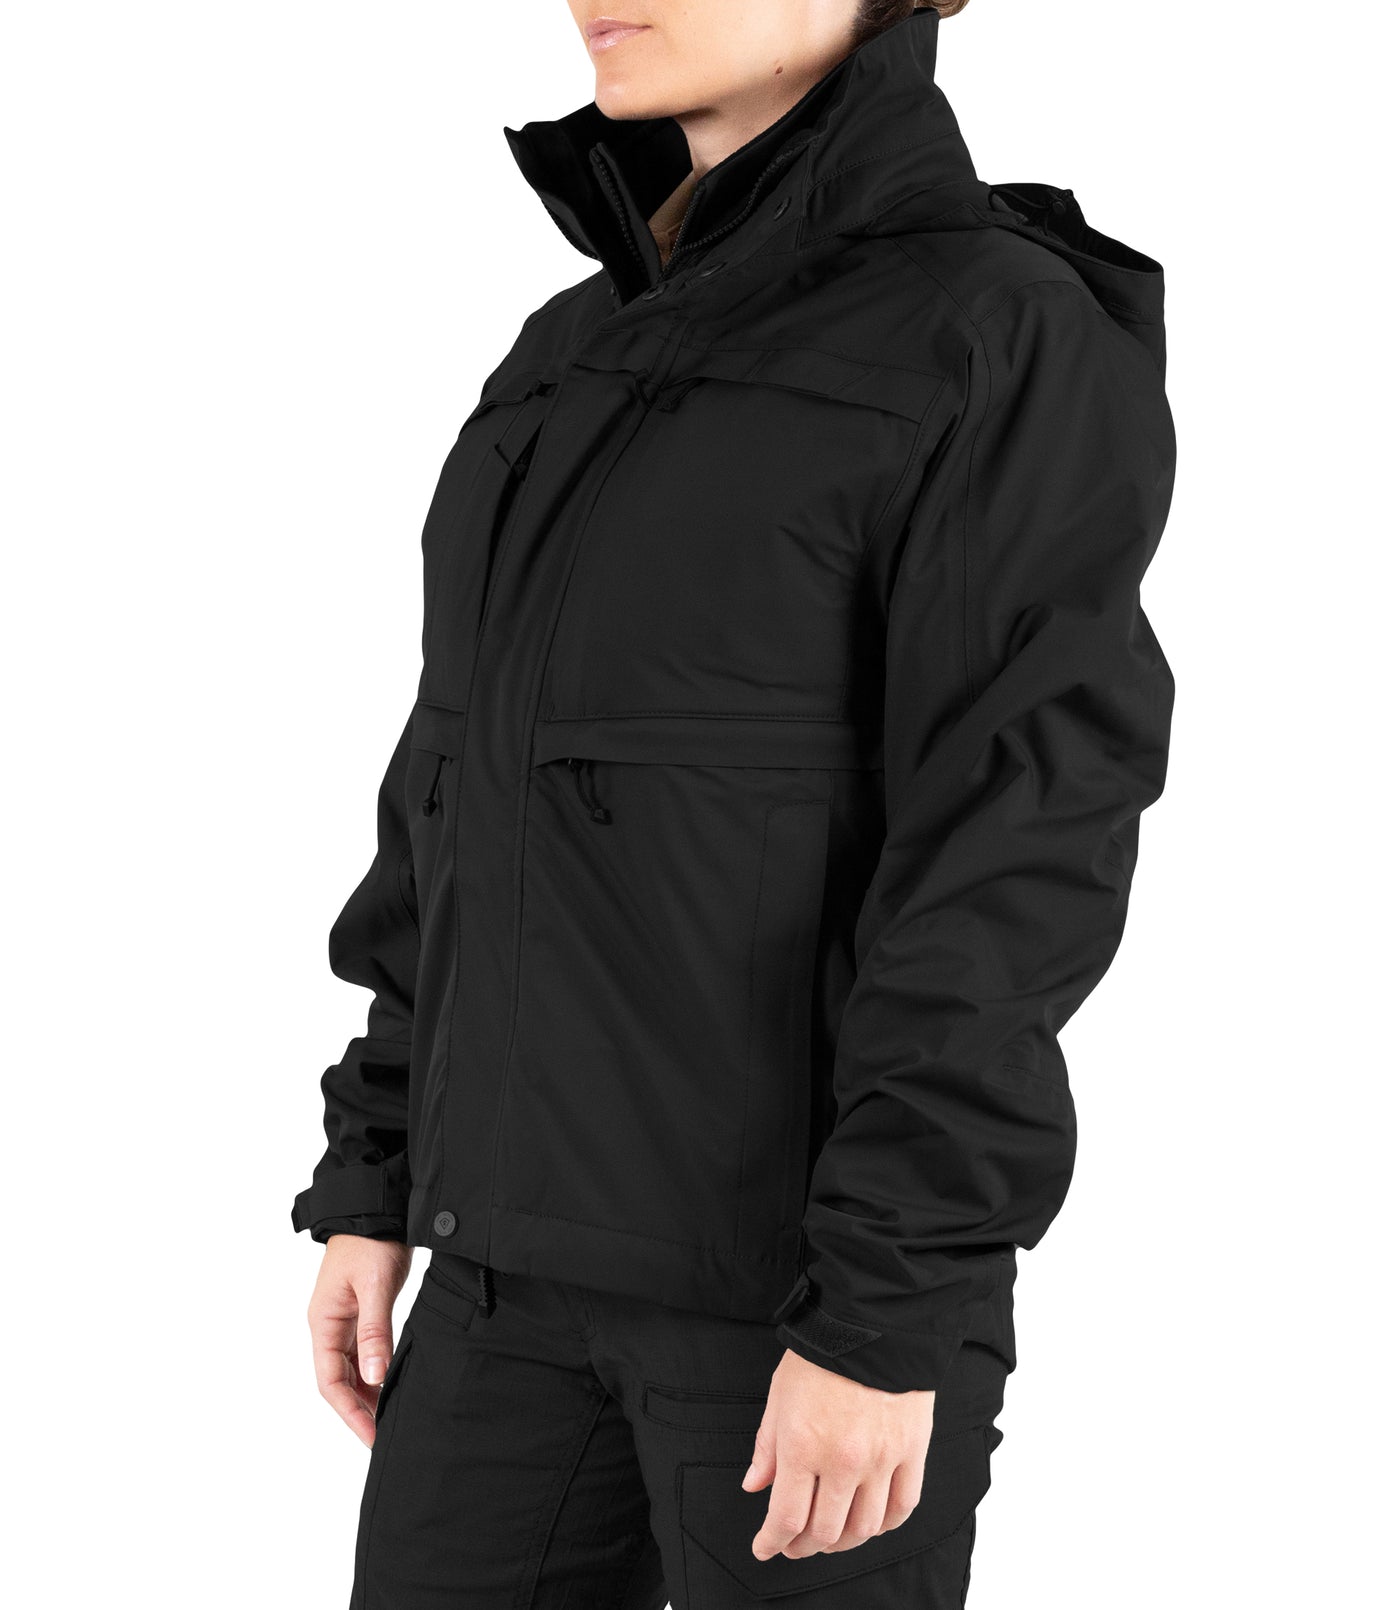 Women’s Tactix 3-In-1 System Jacket – First Tactical